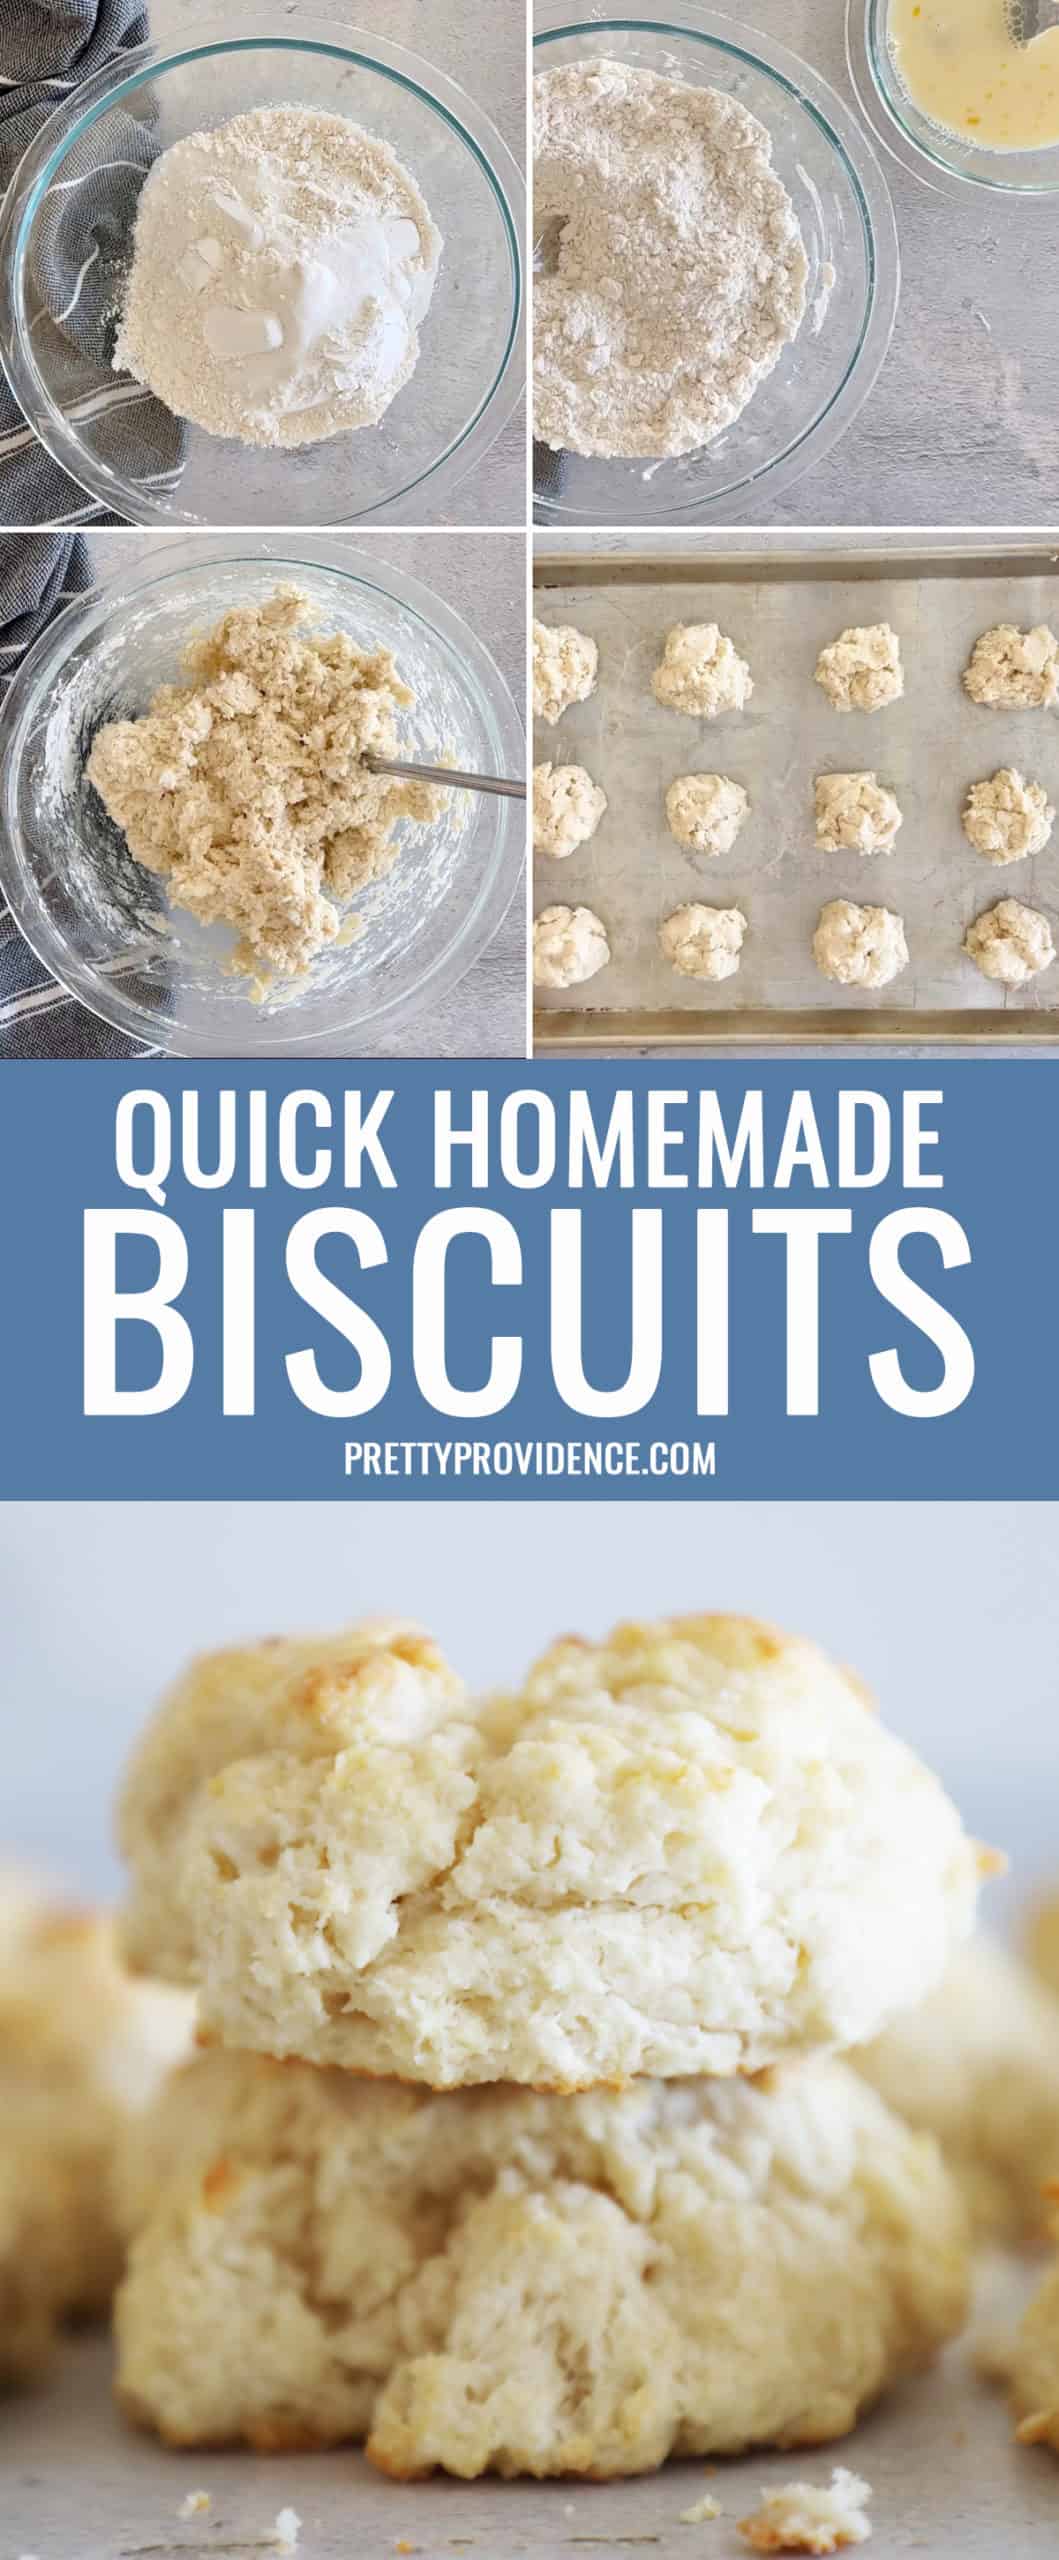 Quick Homemade Biscuits without Buttermilk